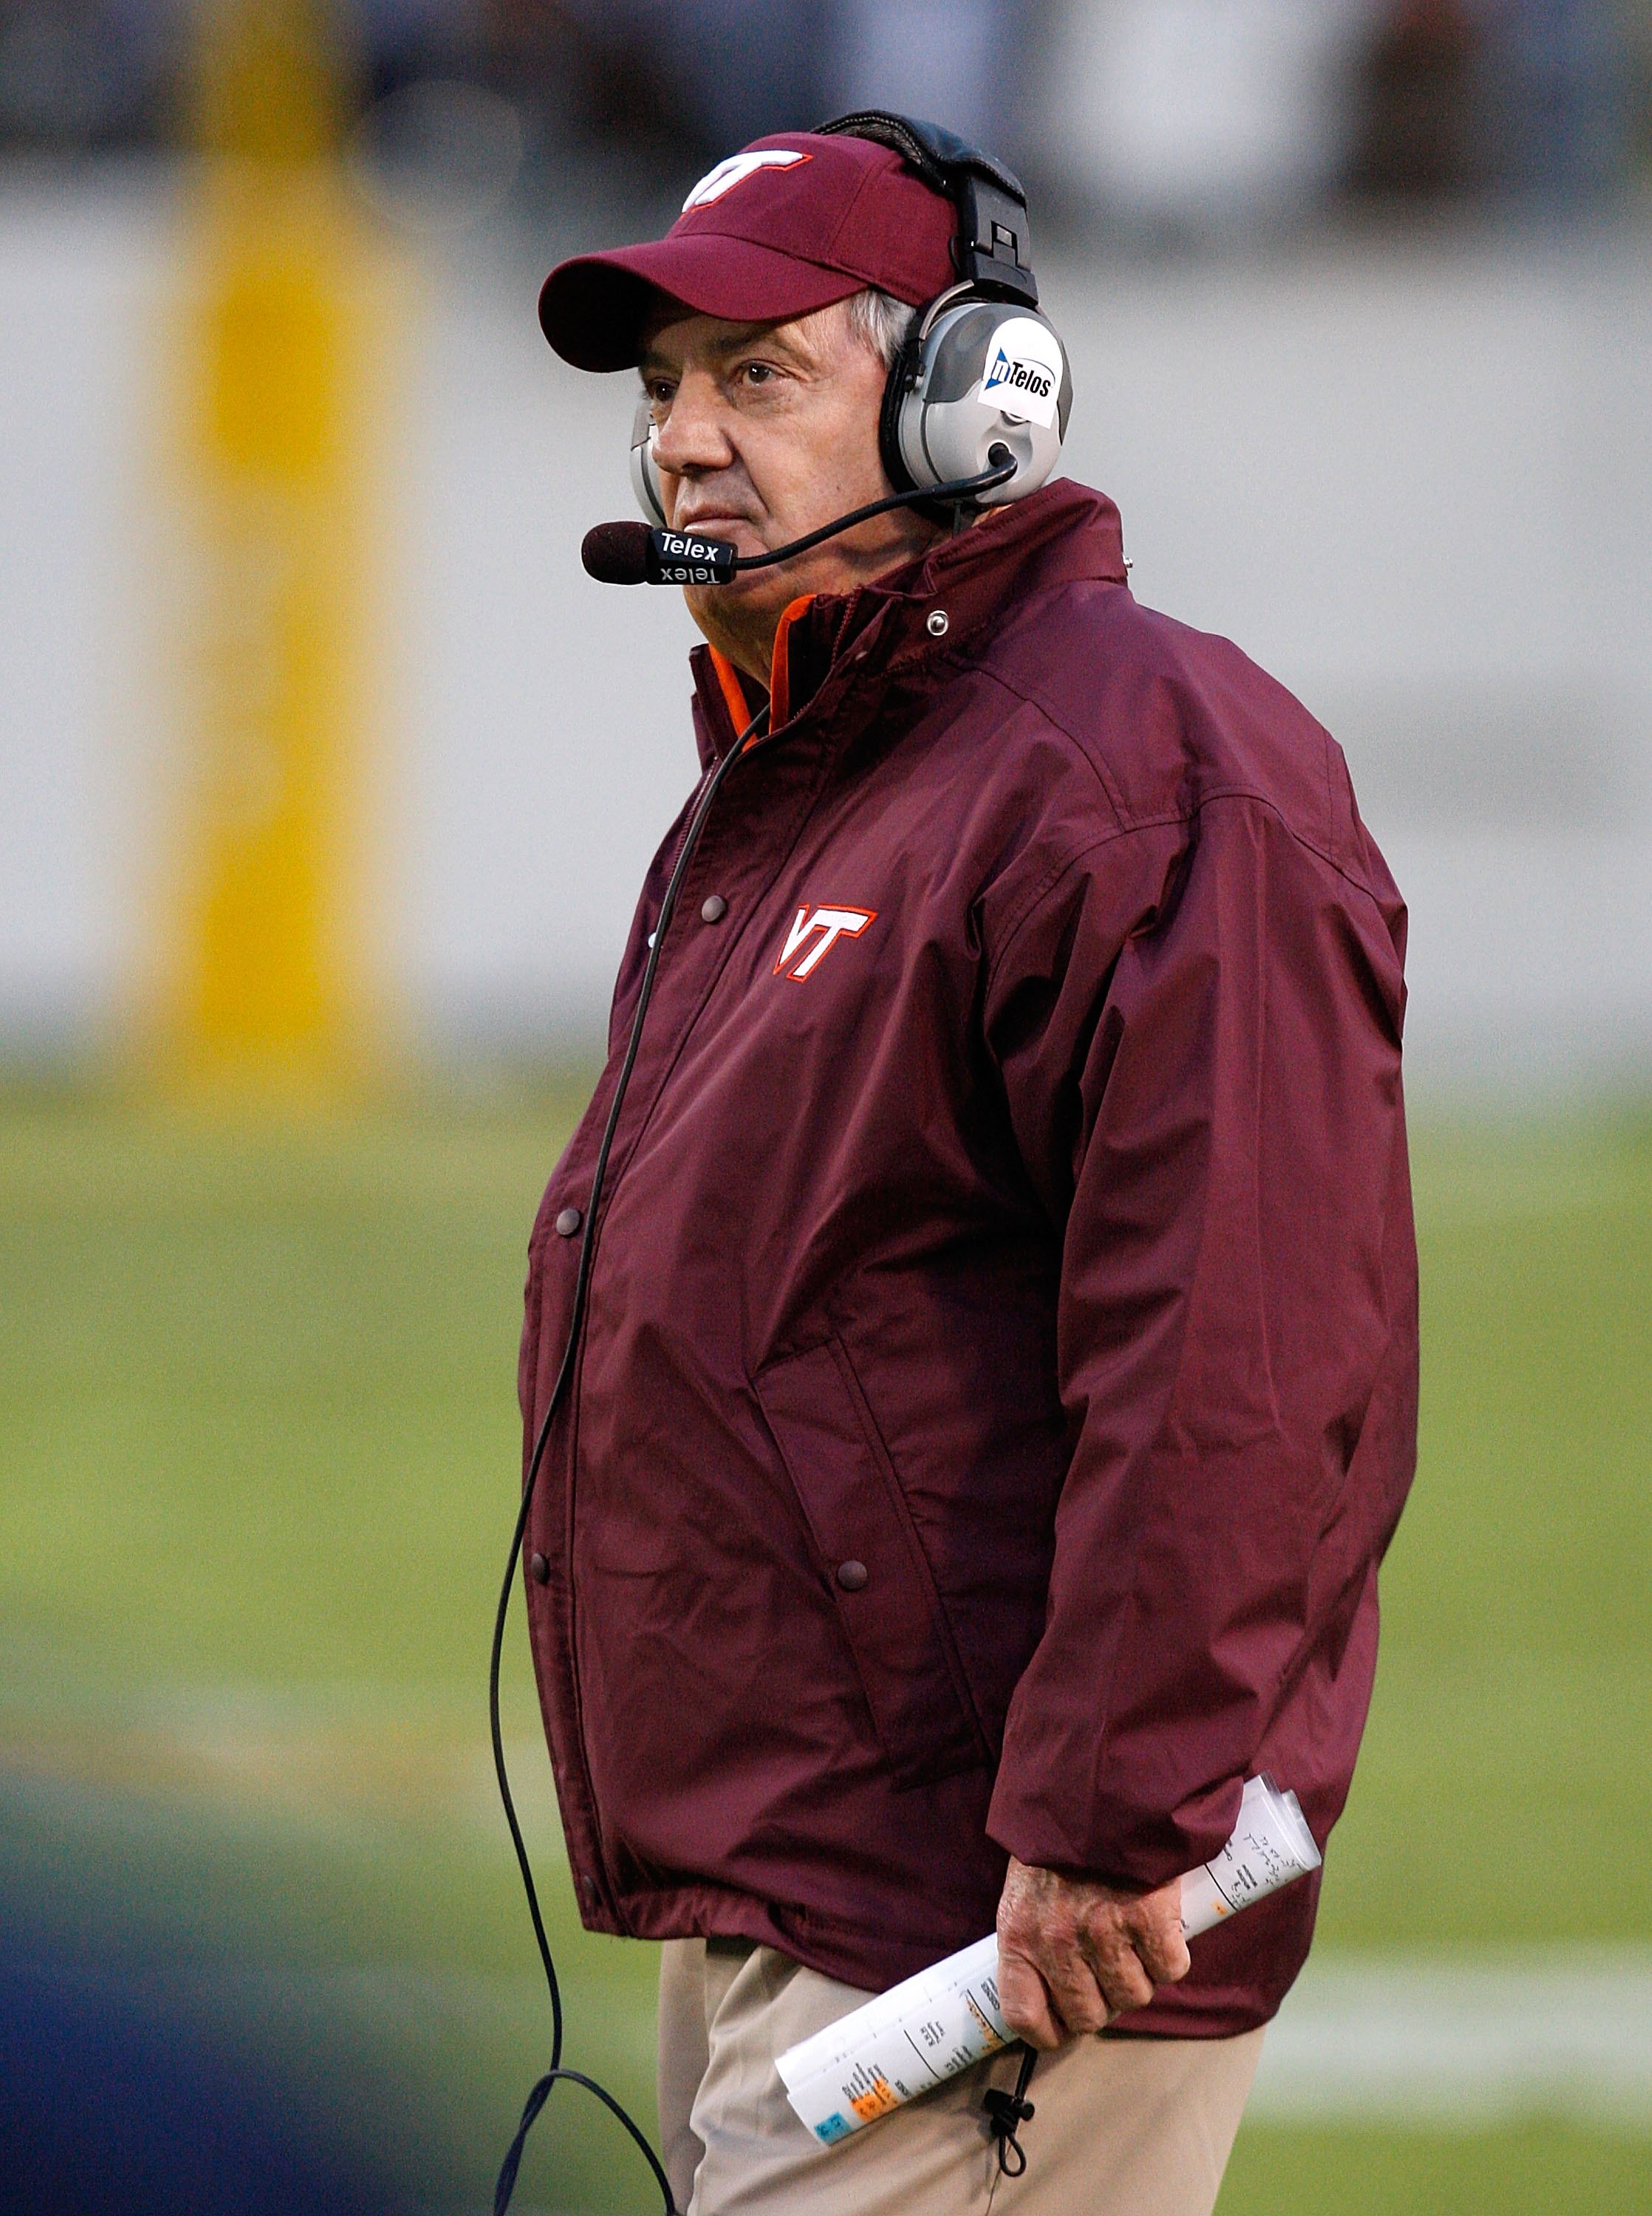 ATLANTA - OCTOBER 17:  Head coach Frank Beamer of the Virginia Tech Hokies looks on from the sidelines against the Georgia Tech Yellow Jackets at Bobby Dodd Stadium on October 17, 2009 in Atlanta, Georgia.  (Photo by Kevin C. Cox/Getty Images)